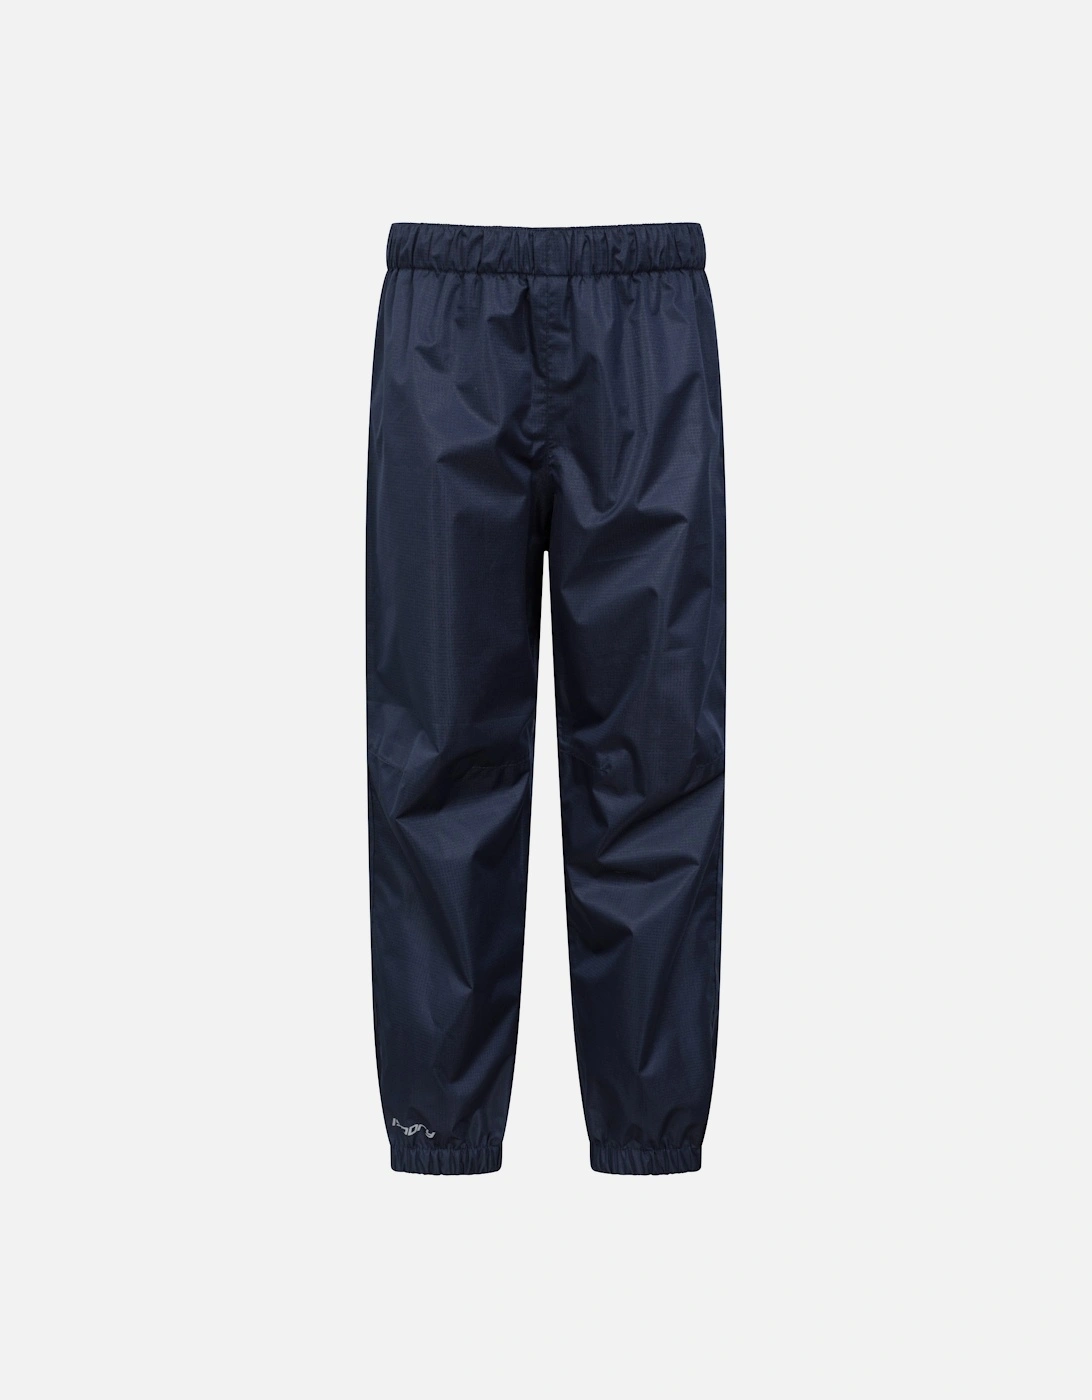 Childrens/Kids Gale Waterproof Over Trousers, 5 of 4